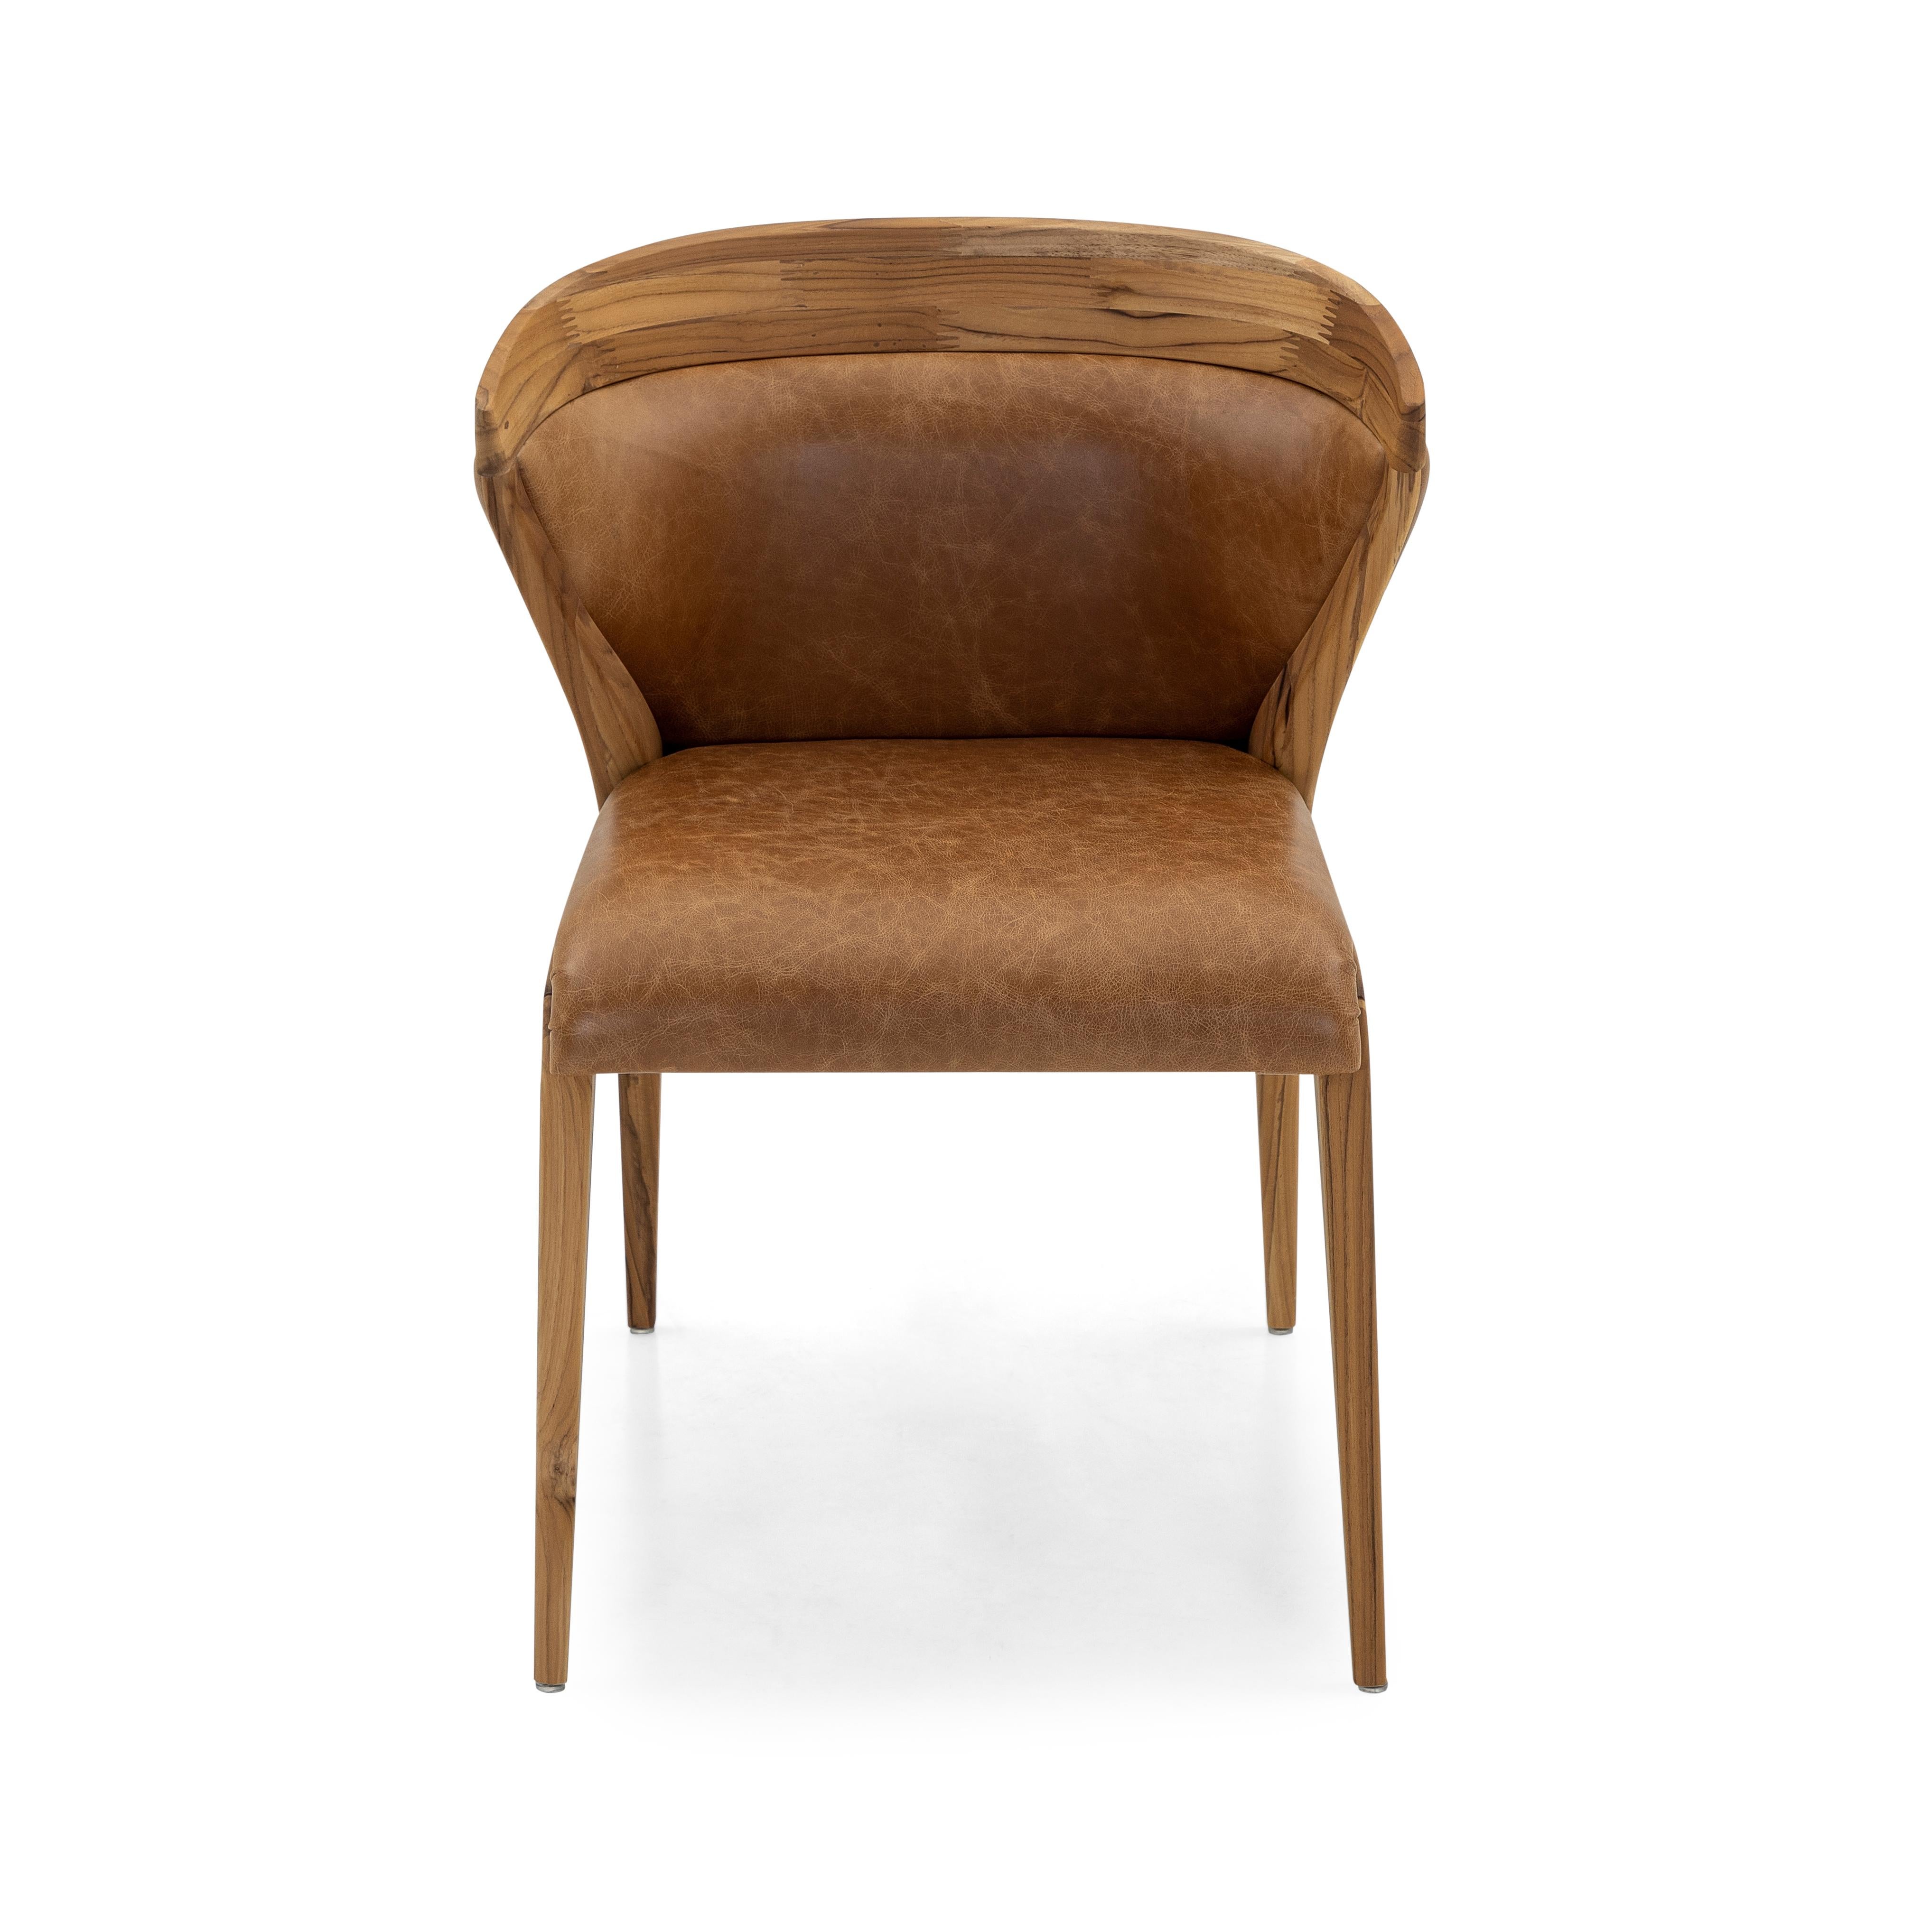 Mat Dining Chair in Teak Wood Finish, Upholstered Back and Brown Leather Seat In New Condition For Sale In Miami, FL